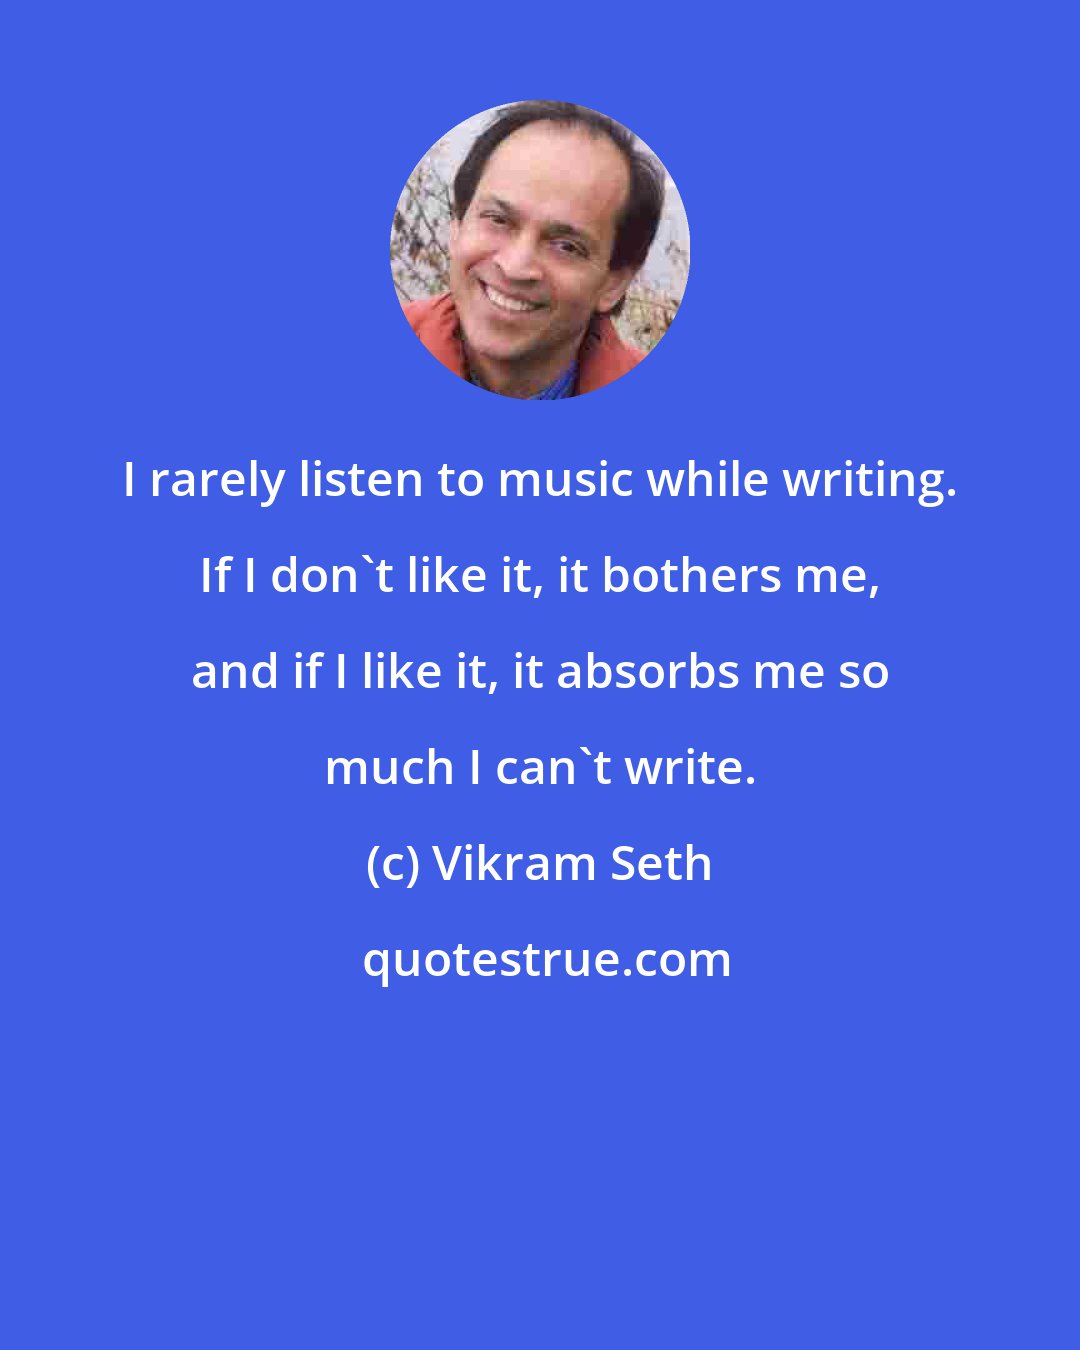 Vikram Seth: I rarely listen to music while writing. If I don't like it, it bothers me, and if I like it, it absorbs me so much I can't write.